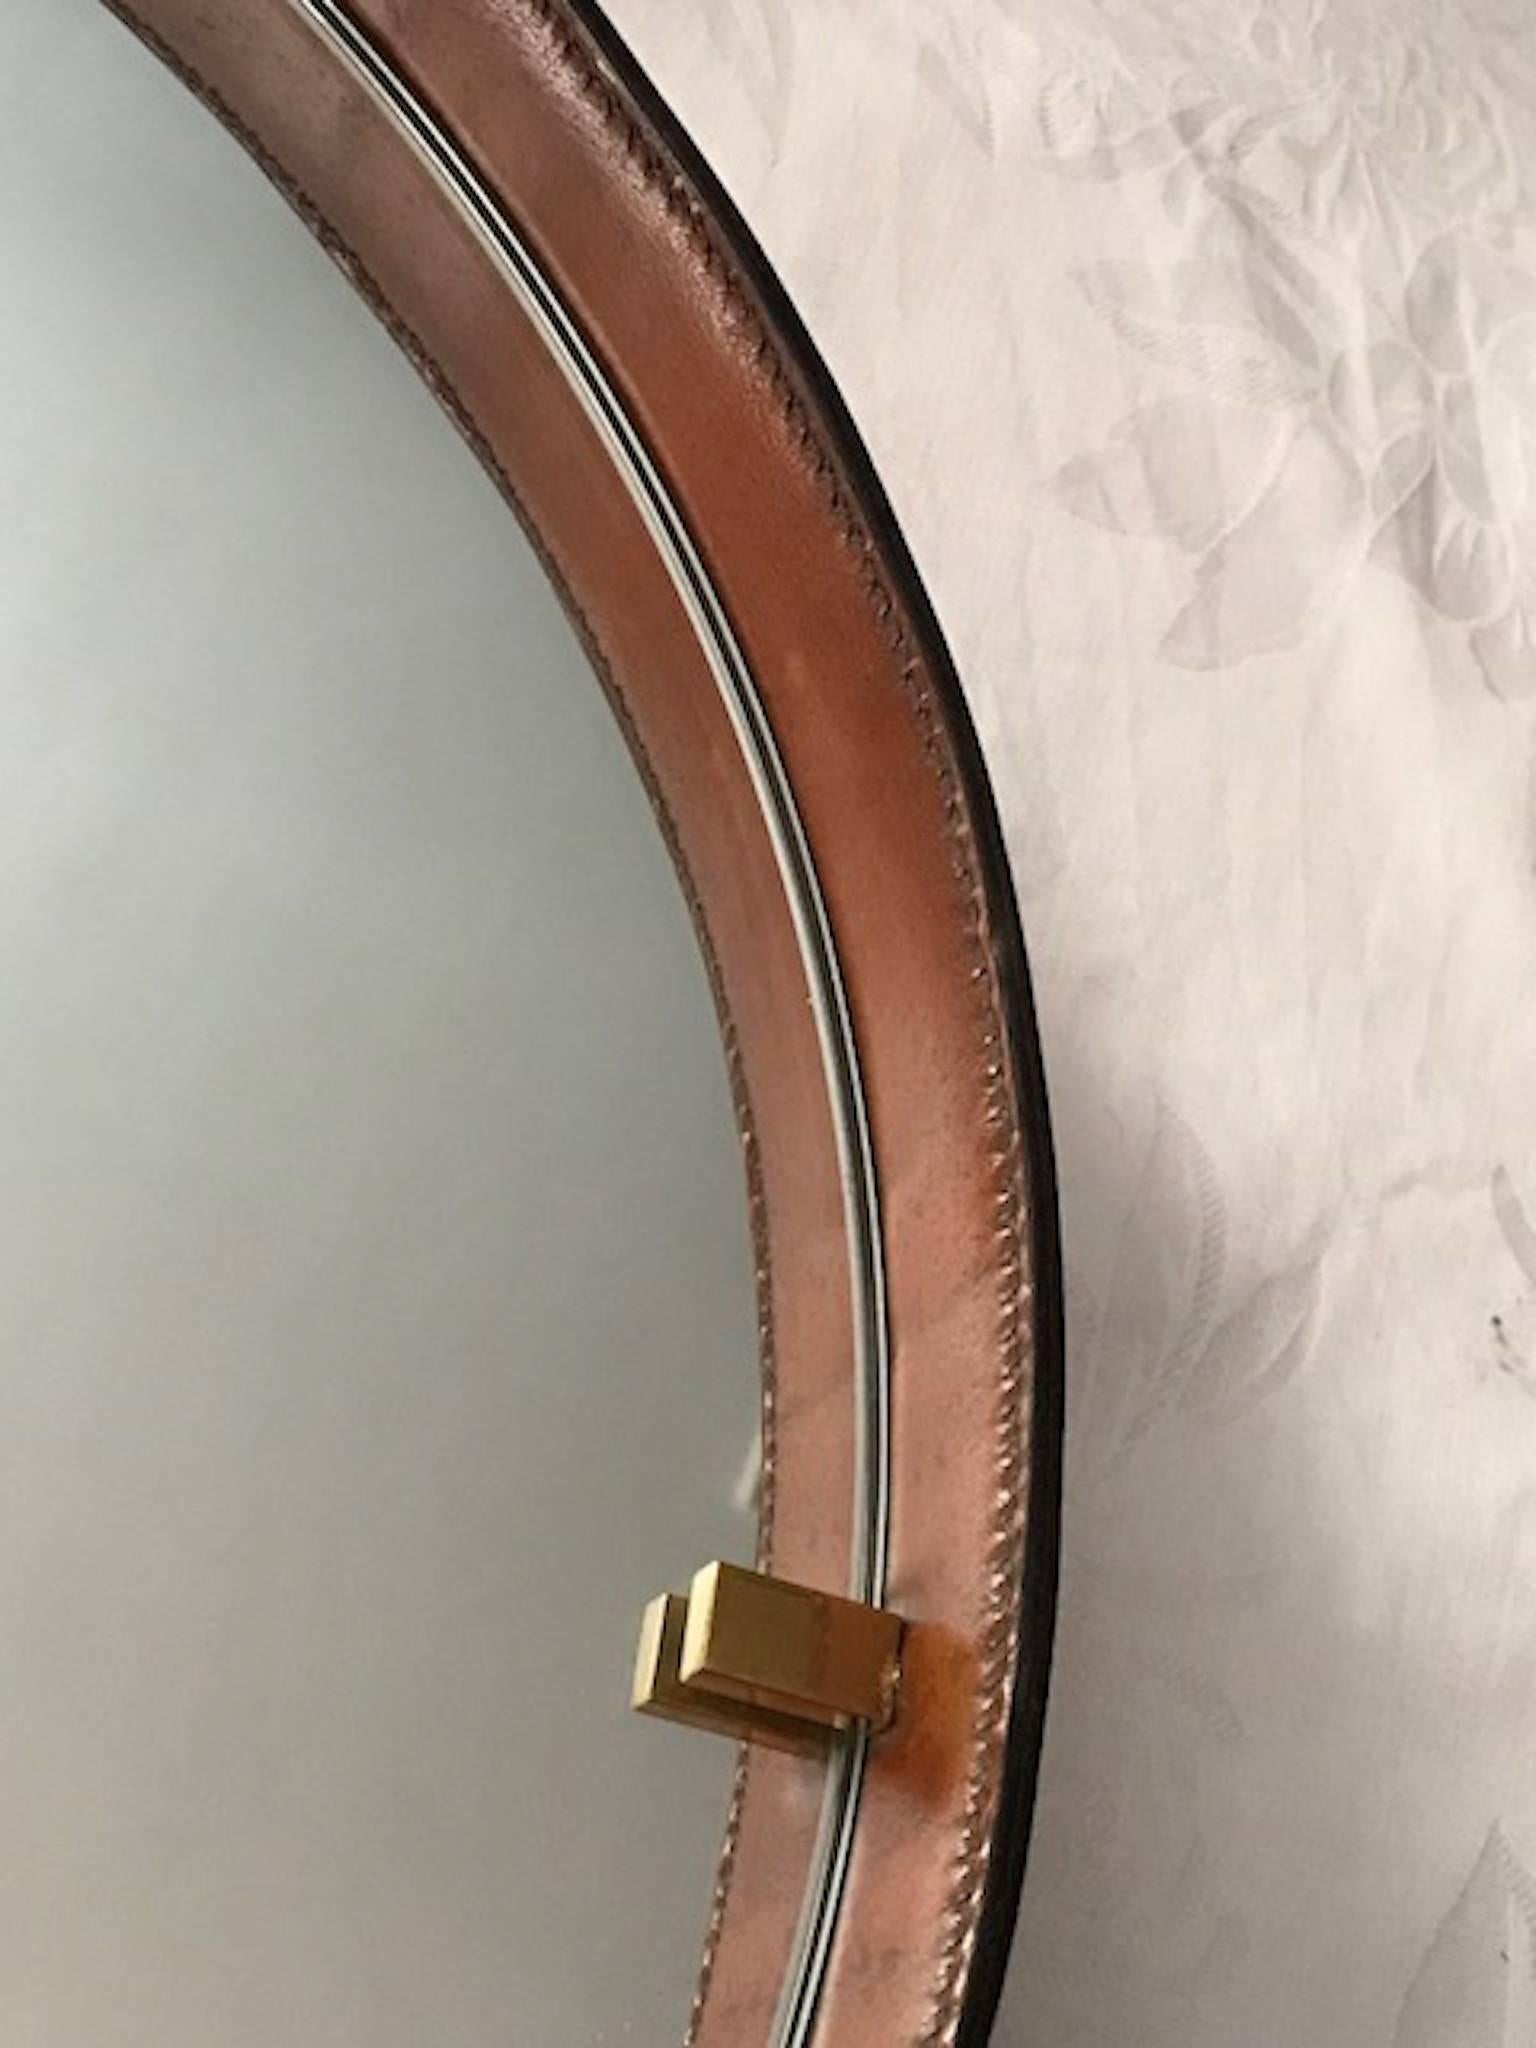 A great post war 1940s-early 1950s Italian round leather mirror suspended from a thick cotton braid cord. The mirror has stitched seams on the outer edge of the leather and it is perfectly distressed from age. Original patina on brass and original